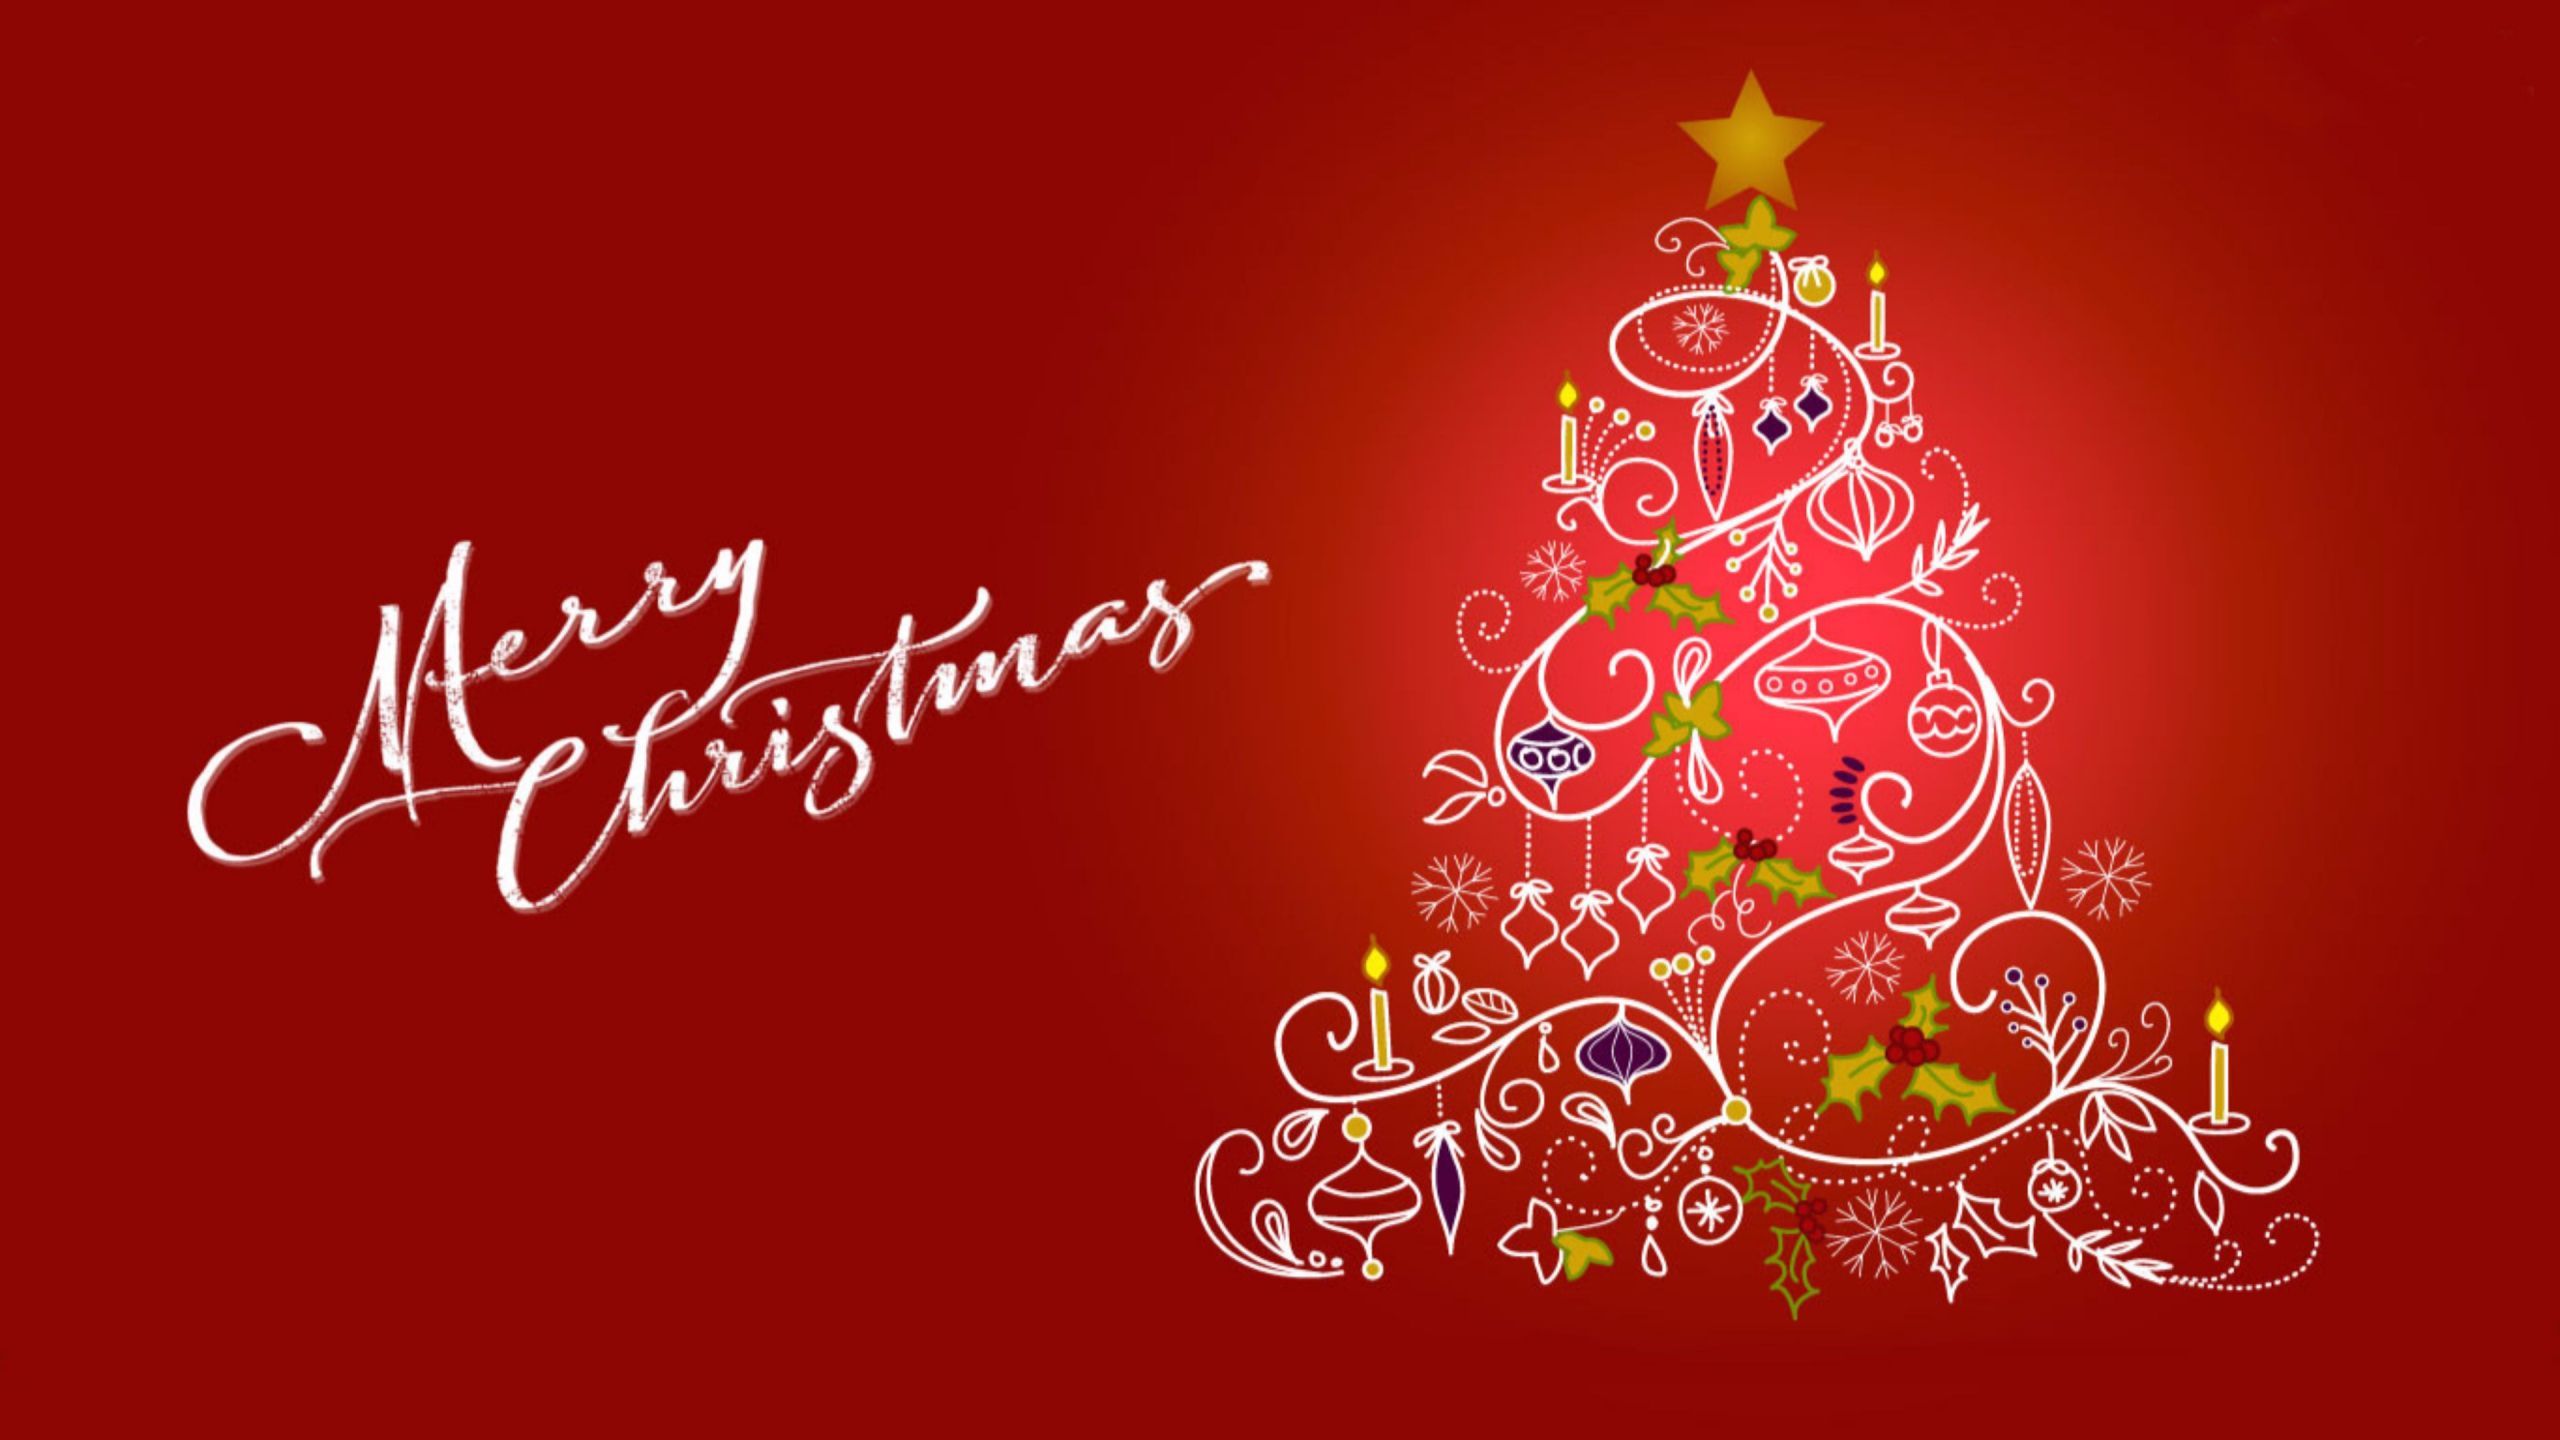 Simple Merry Christmas wallpaper in 2560x1440 resolution